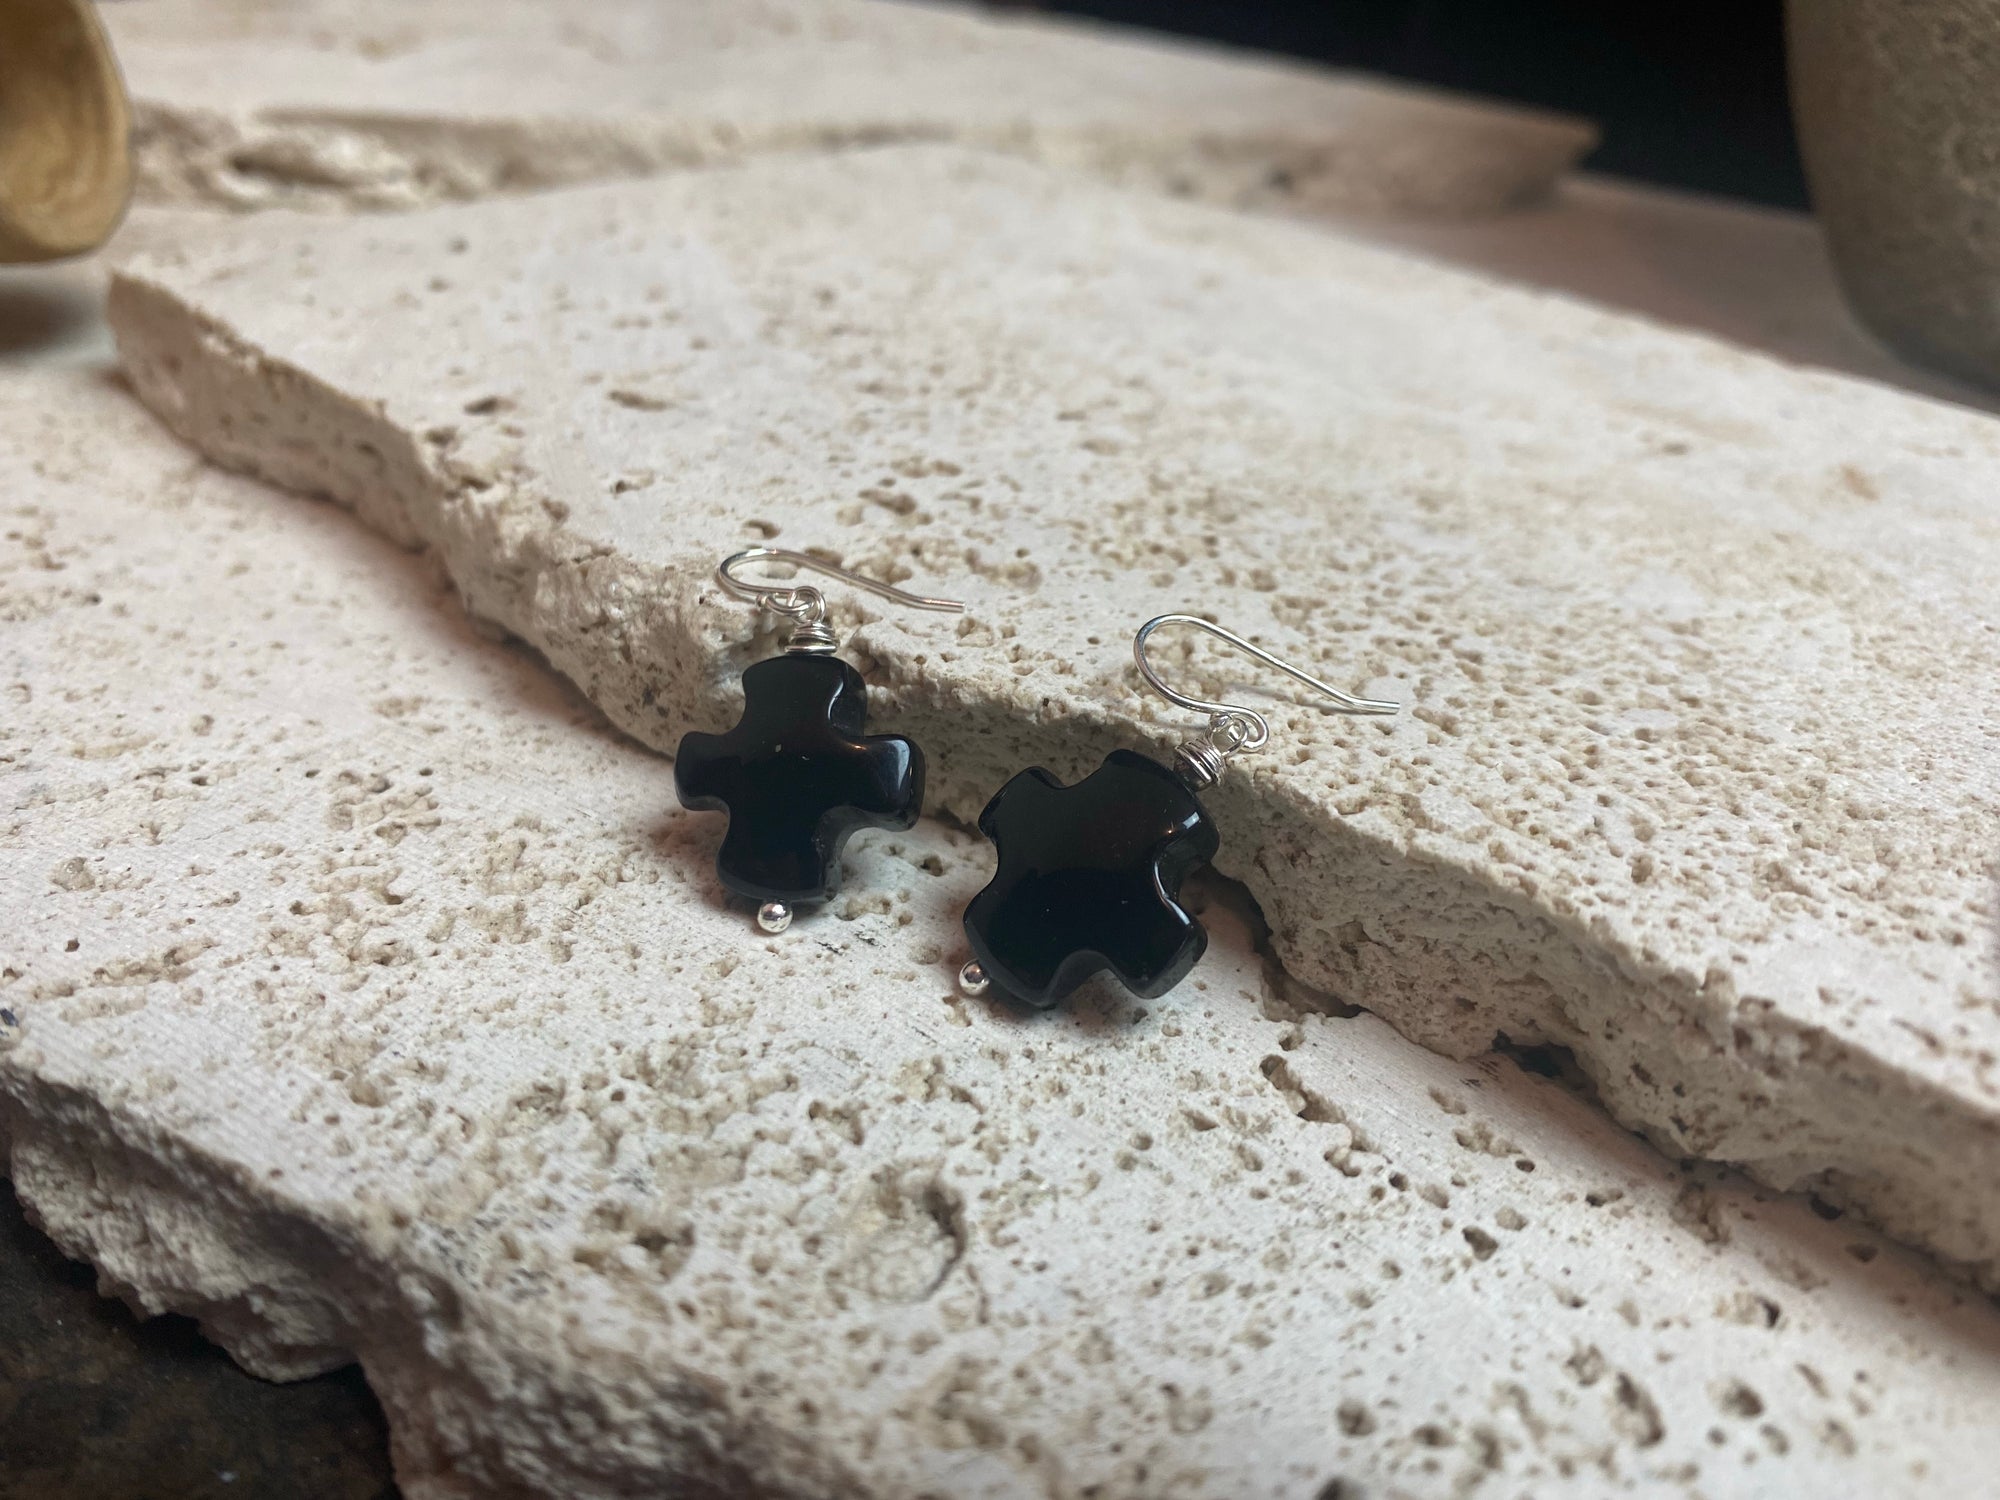 Our bold black cross earrings are hand crafted from sterling silver and hand cut natural, deep black agate stone, giving them a very southwest earring vibe. Height 3 cm (1.25”)